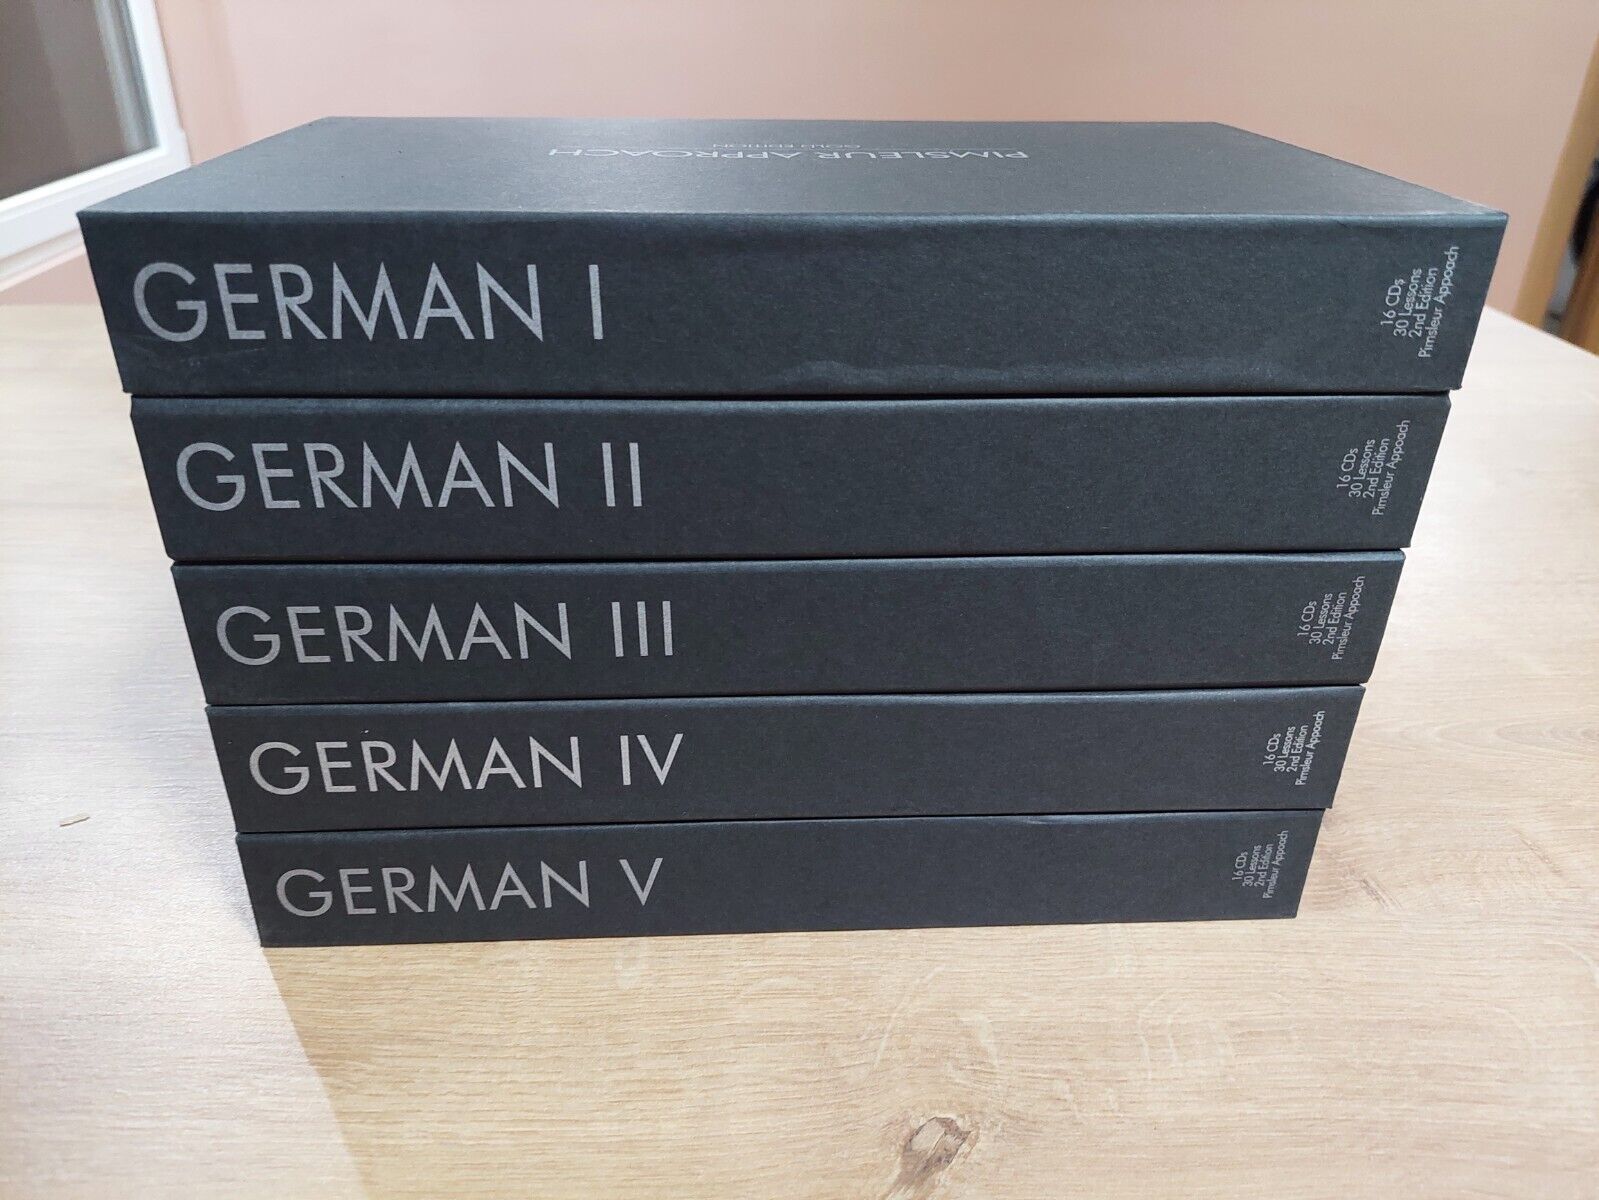 Pimsleur Approach Gold Edition German Levels 1-5 Total 80 CD's Full Bundle